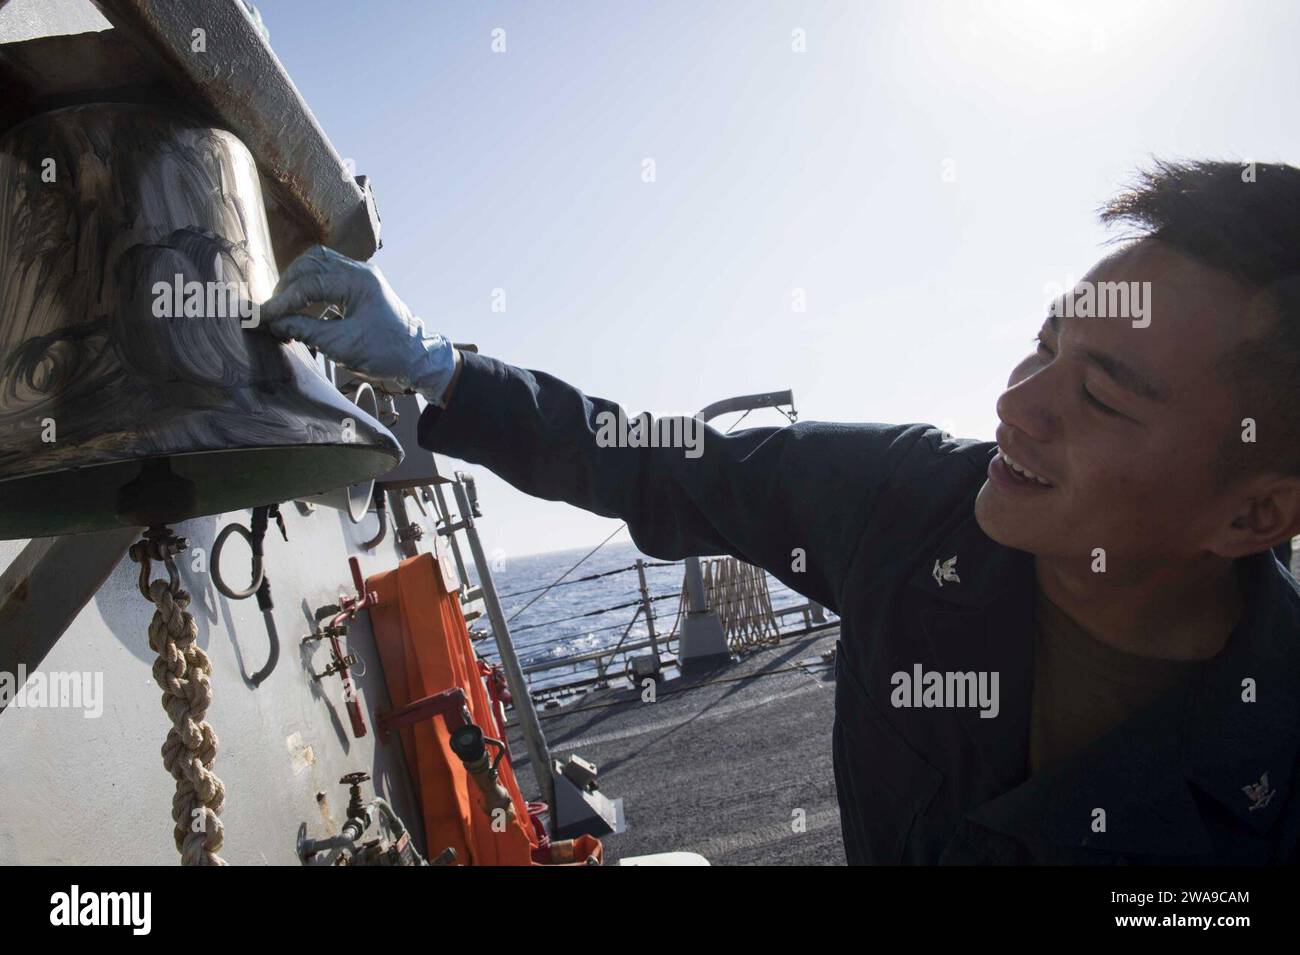 US military forces. 180618KP946-0002 MEDITERRANEAN SEA (June 18, 2018) Culinary Specialist 3rd Class Rjraphael Calaguas, from Woodbridge, Virginia, shines a bell aboard the Arleigh Burke-class guided-missile destroyer USS Donald Cook (DDG 75) June 18, 2018. Donald Cook, forward-deployed to Rota, Spain, is on its seventh patrol in the U.S. 6th Fleet area of operations in support of regional allies and partners, and U.S. national security interests in Europe and Africa. (U.S. Navy photo by Mass Communication Specialist 2nd Class Alyssa Weeks / Released) Stock Photo